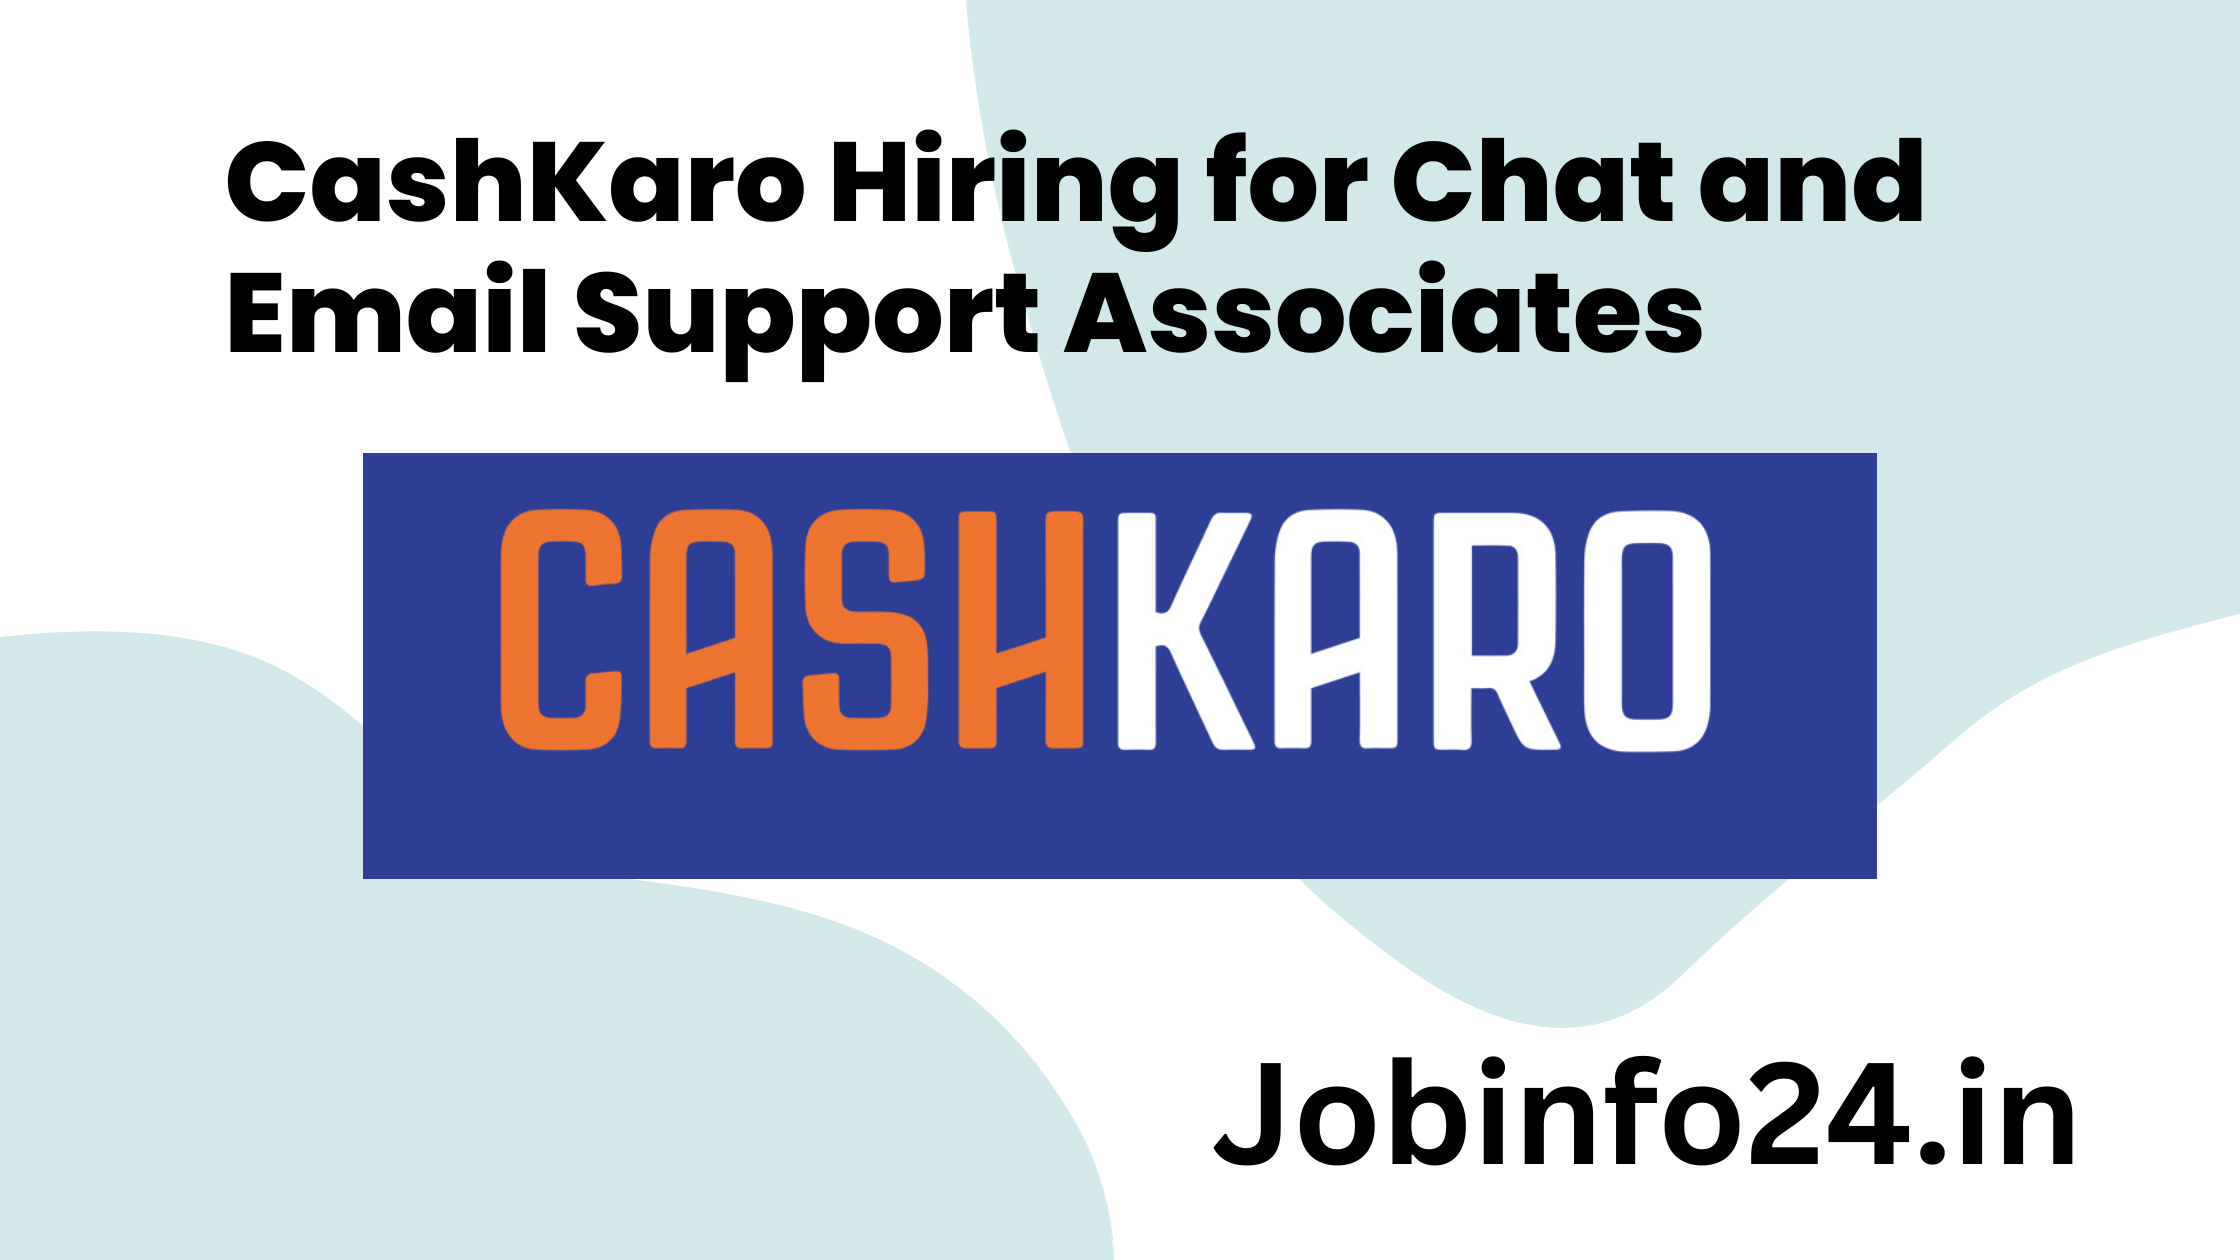 CashKaro Hiring for Chat and Email Support Associates